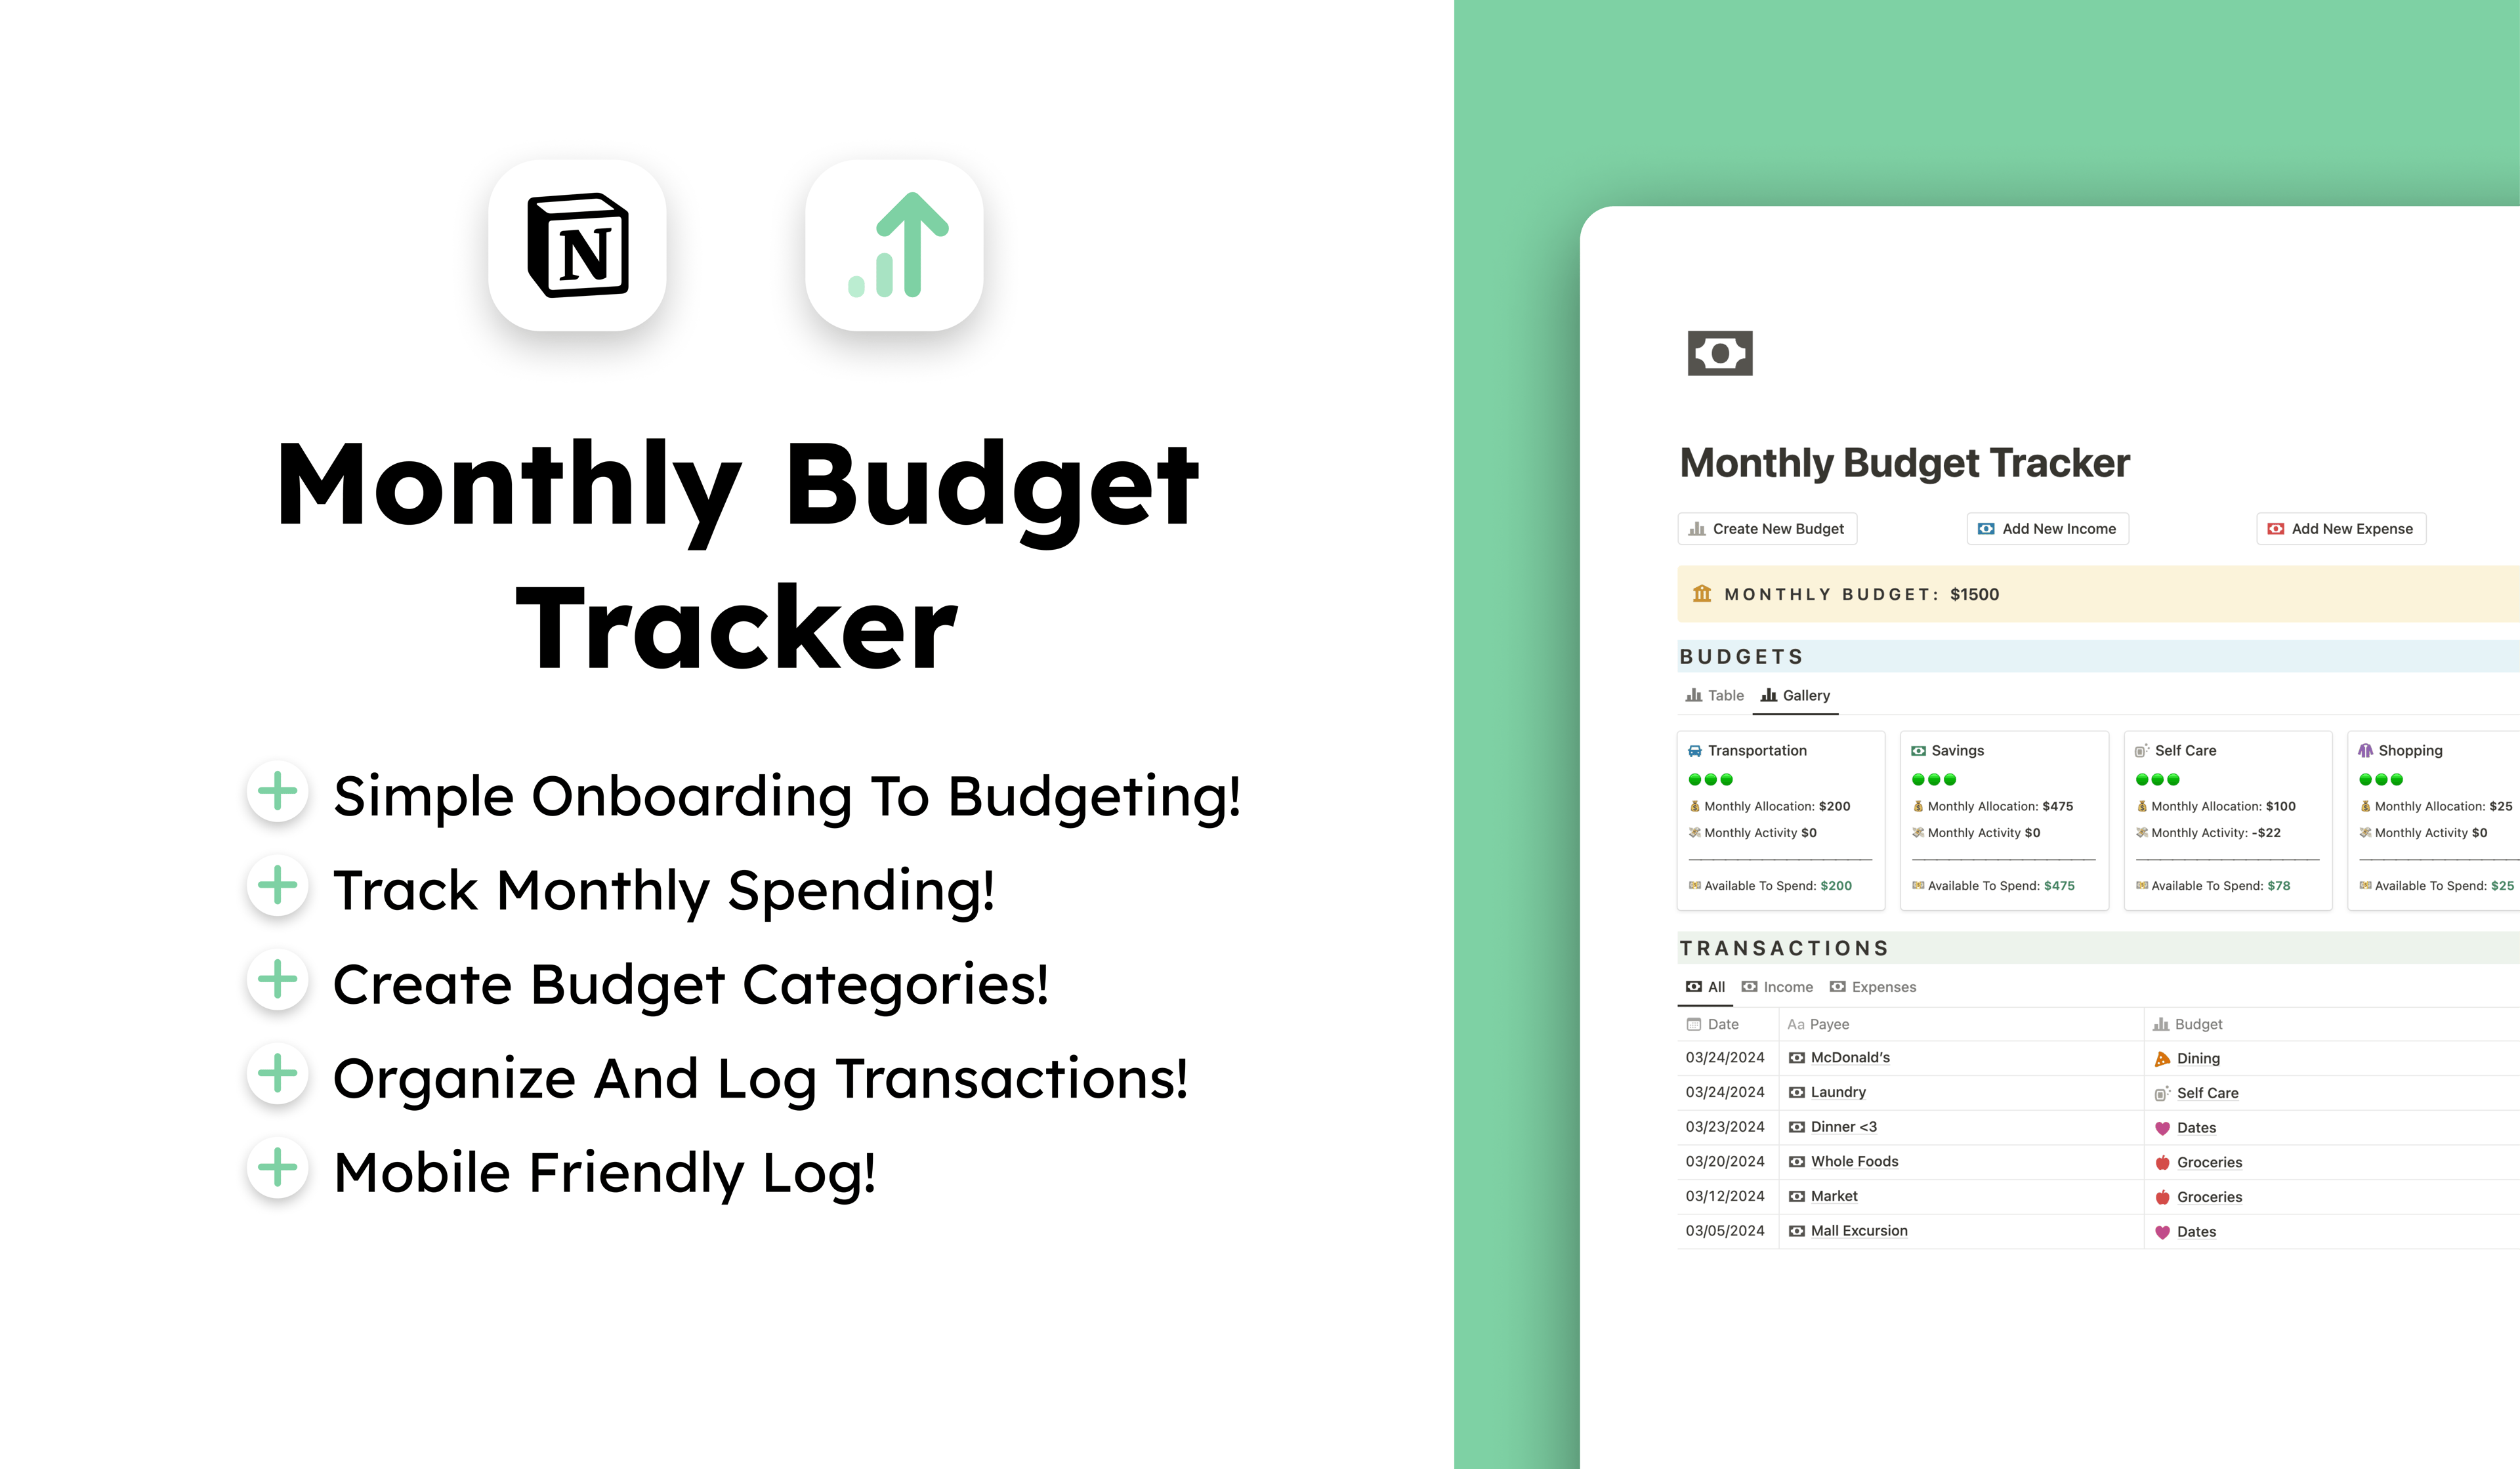 Start your budgeting journey! 💰